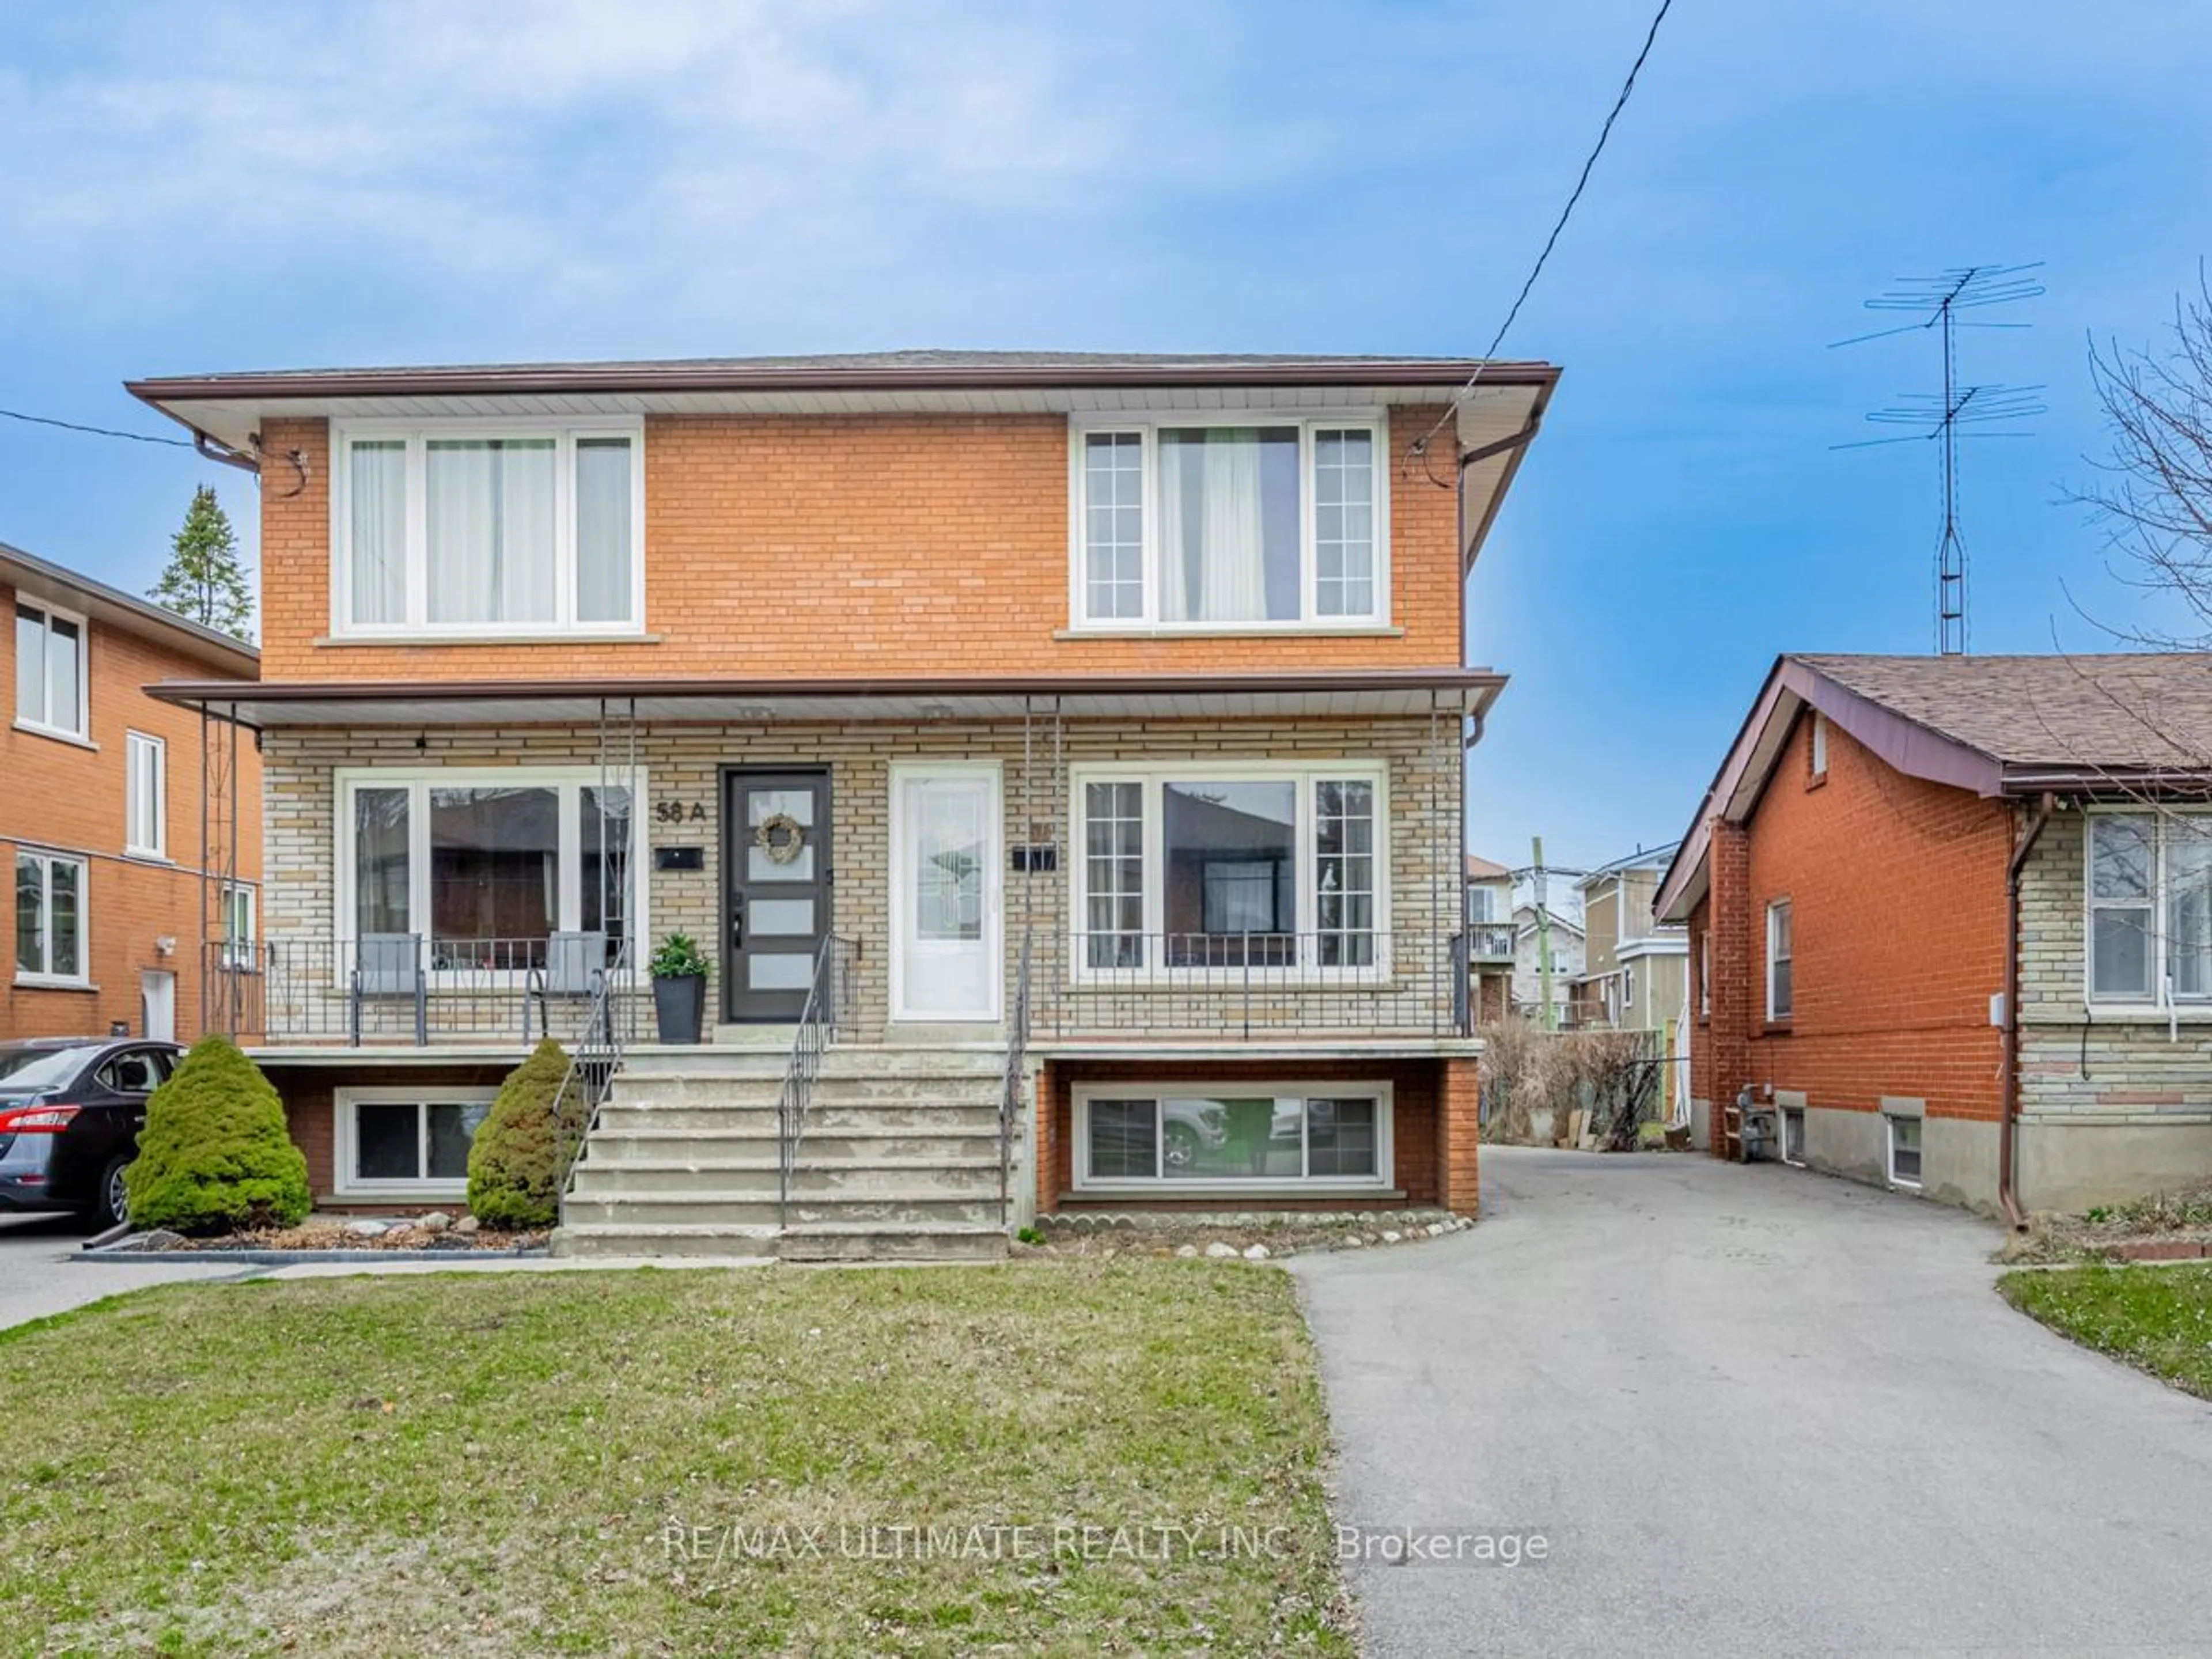 Home with unknown exterior material for 58 Roseland Dr, Toronto Ontario M8W 1Y5